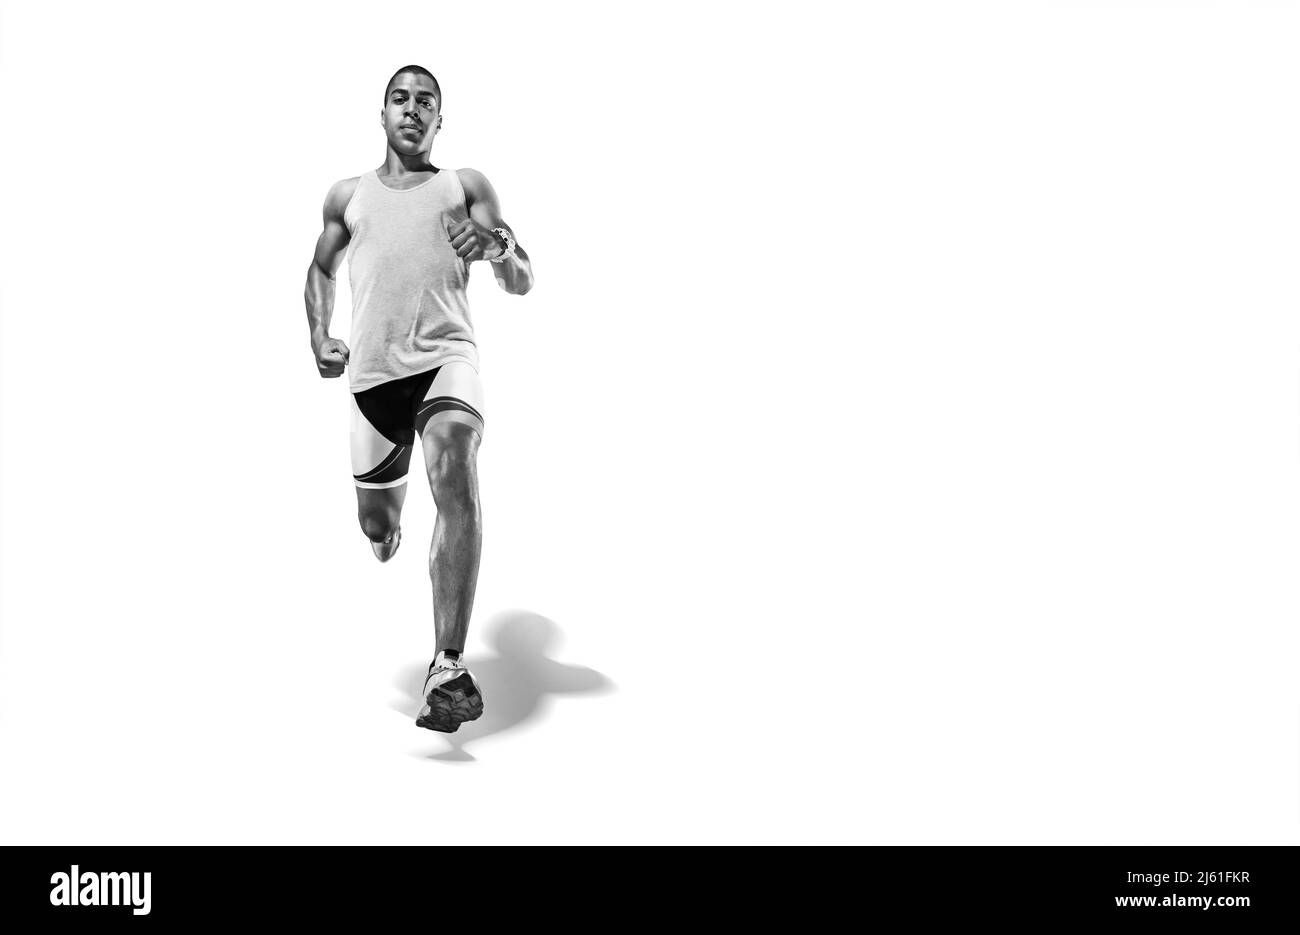 Sports background. Runner on the start. Black and white image isolated on white. Stock Photo